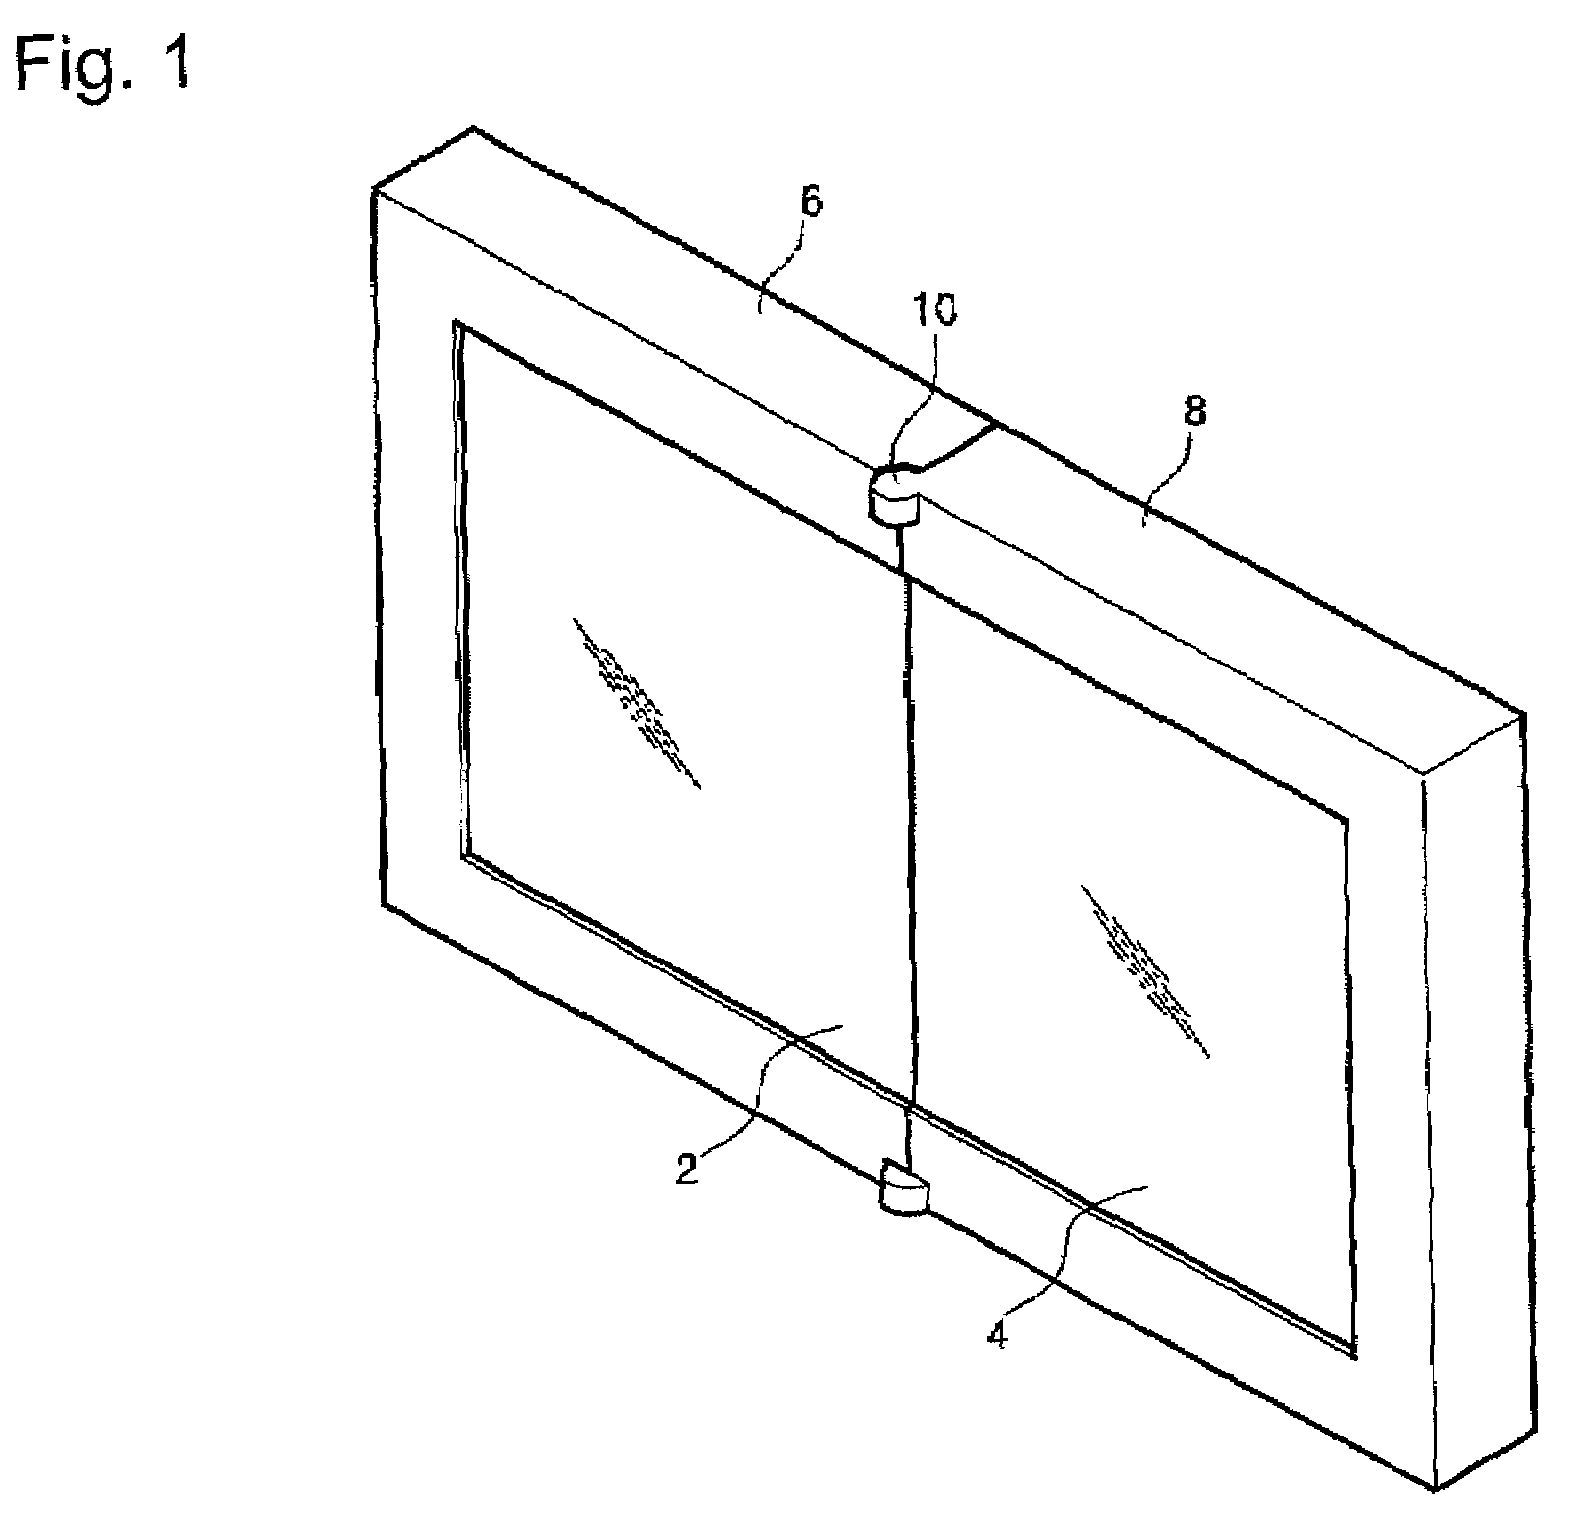 Case for portable display devices